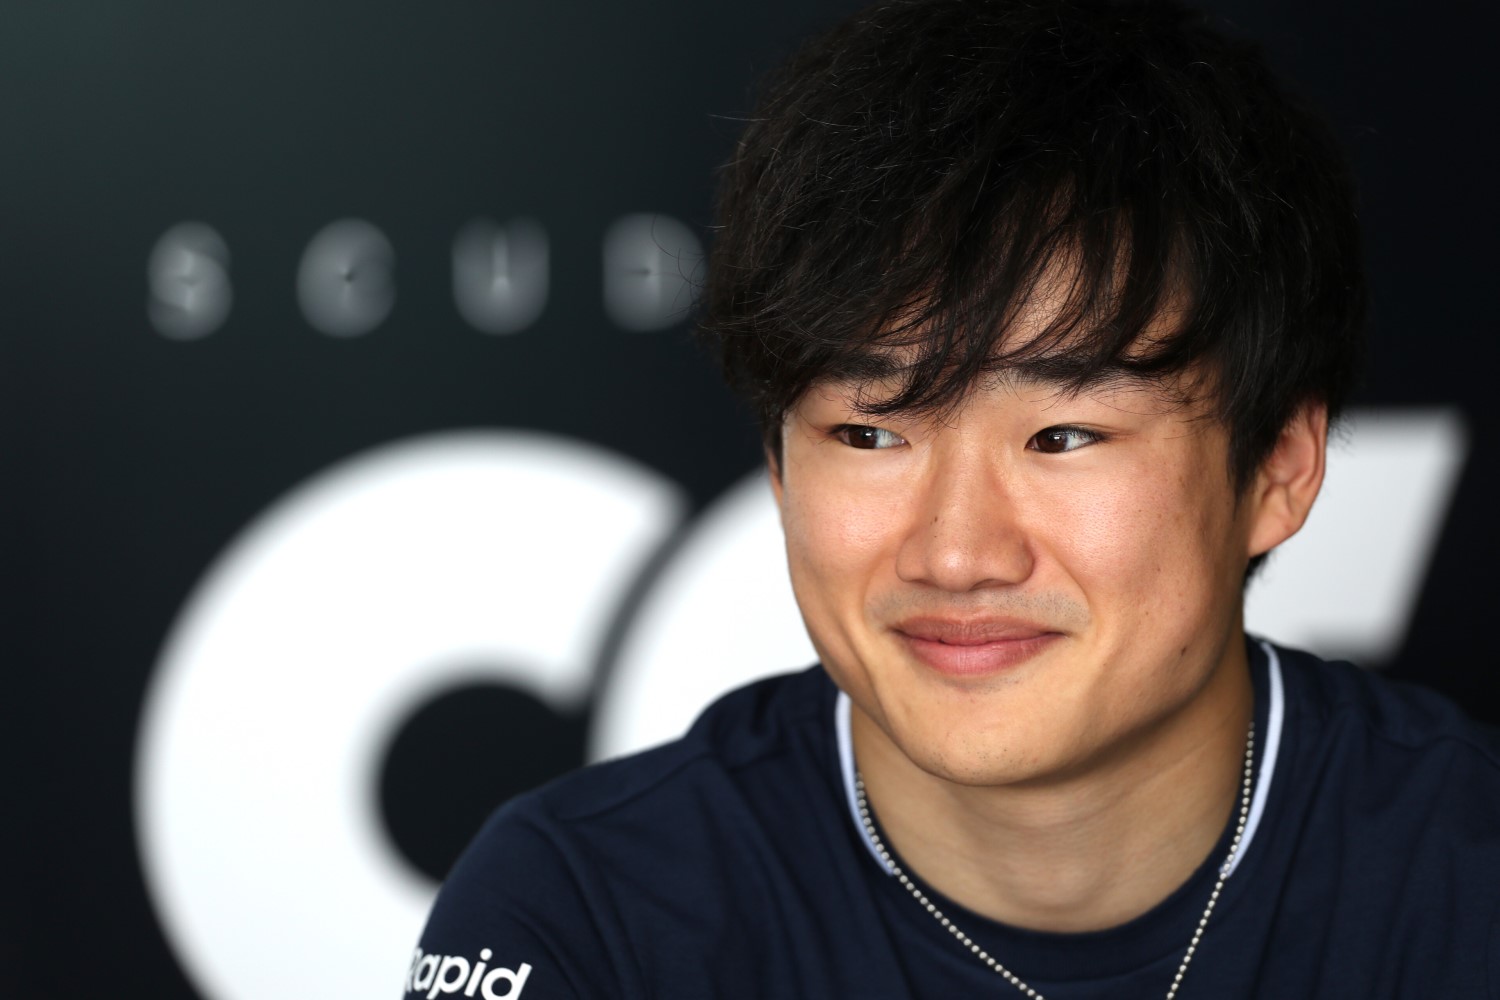 Yuki Tsunoda of Japan and Scuderia AlphaTauri talks to the media in the Paddock during previews ahead of the F1 Grand Prix of Saudi Arabia at Jeddah Corniche Circuit on March 16, 2023 in Jeddah, Saudi Arabia. (Photo by Peter Fox/Getty Images) // Getty Images / Red Bull Content Pool